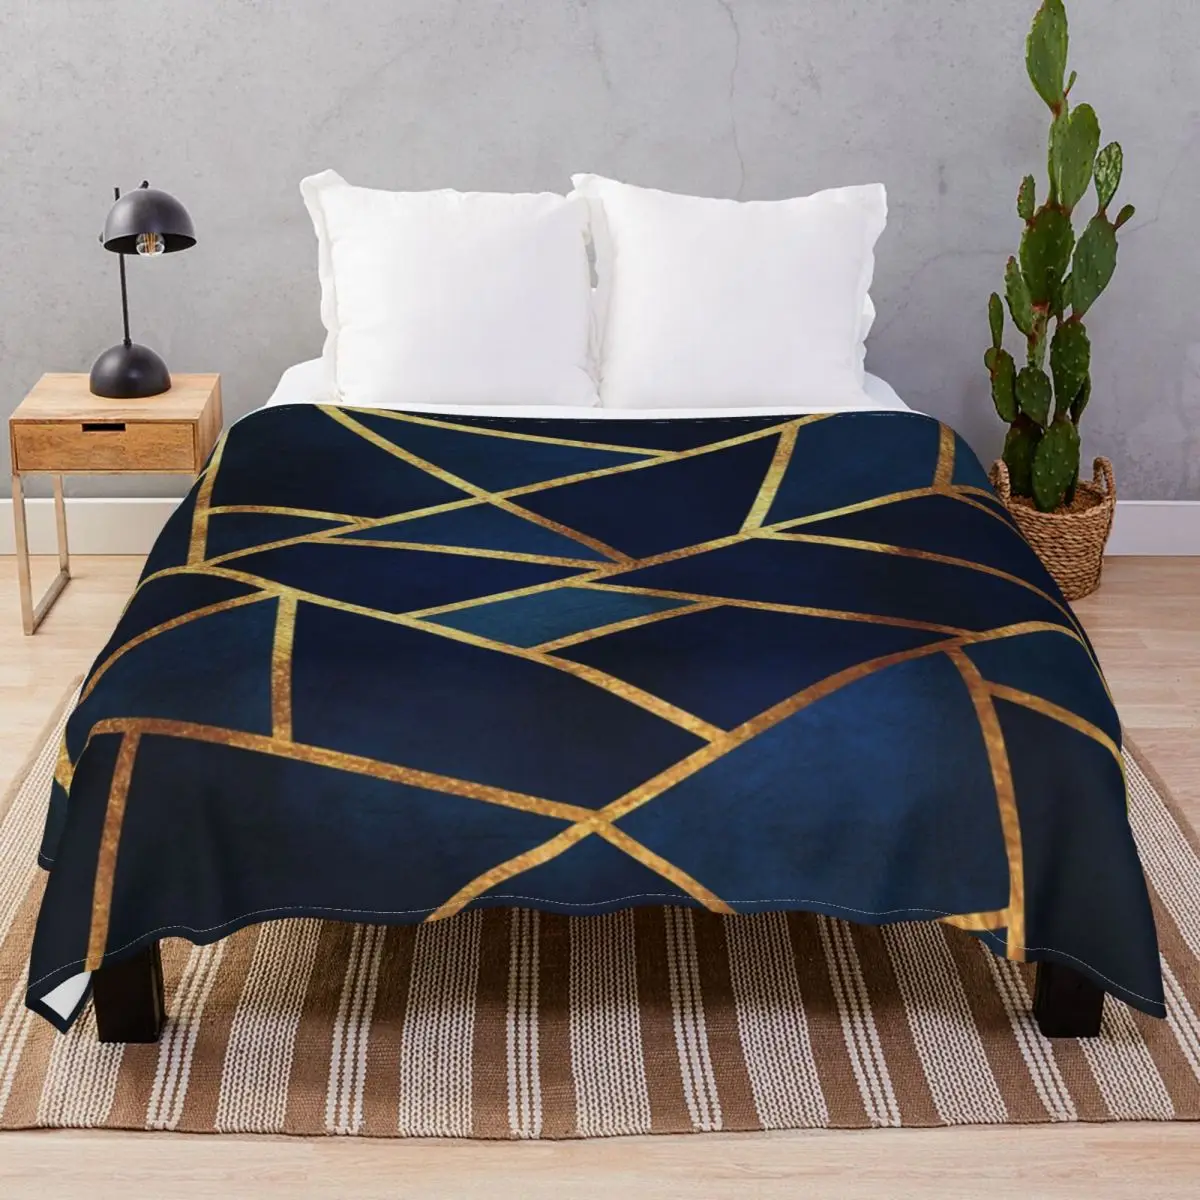 Navy Gold Stone Geometric Blankets Flannel Spring Autumn Multi-function Throw Blanket for Bed Sofa Travel Cinema